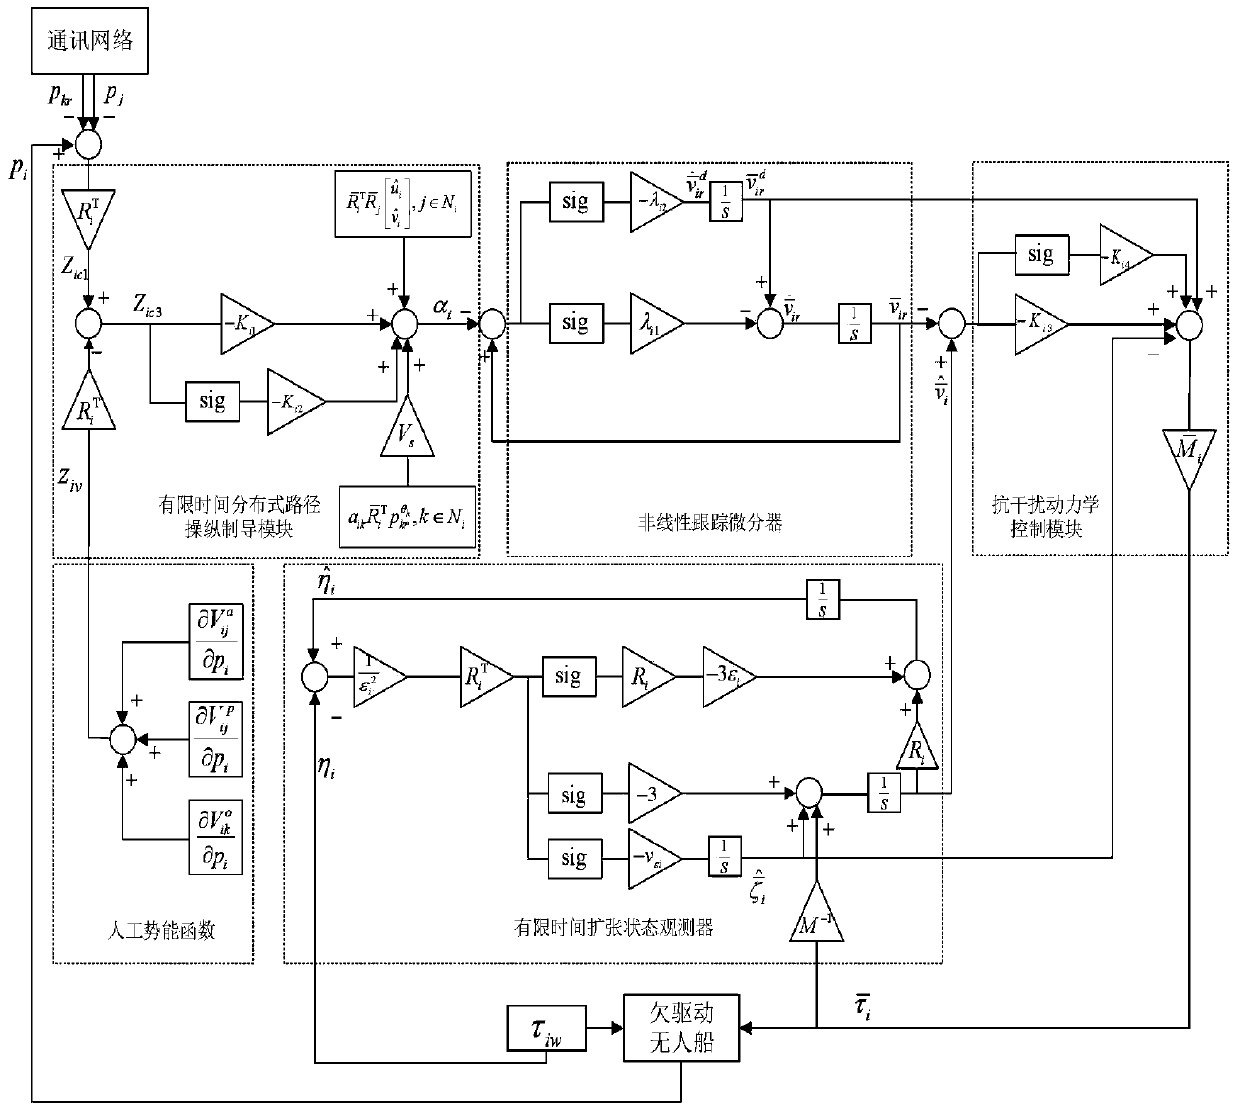 Finite time convergence unmanned ship cooperative controller design method